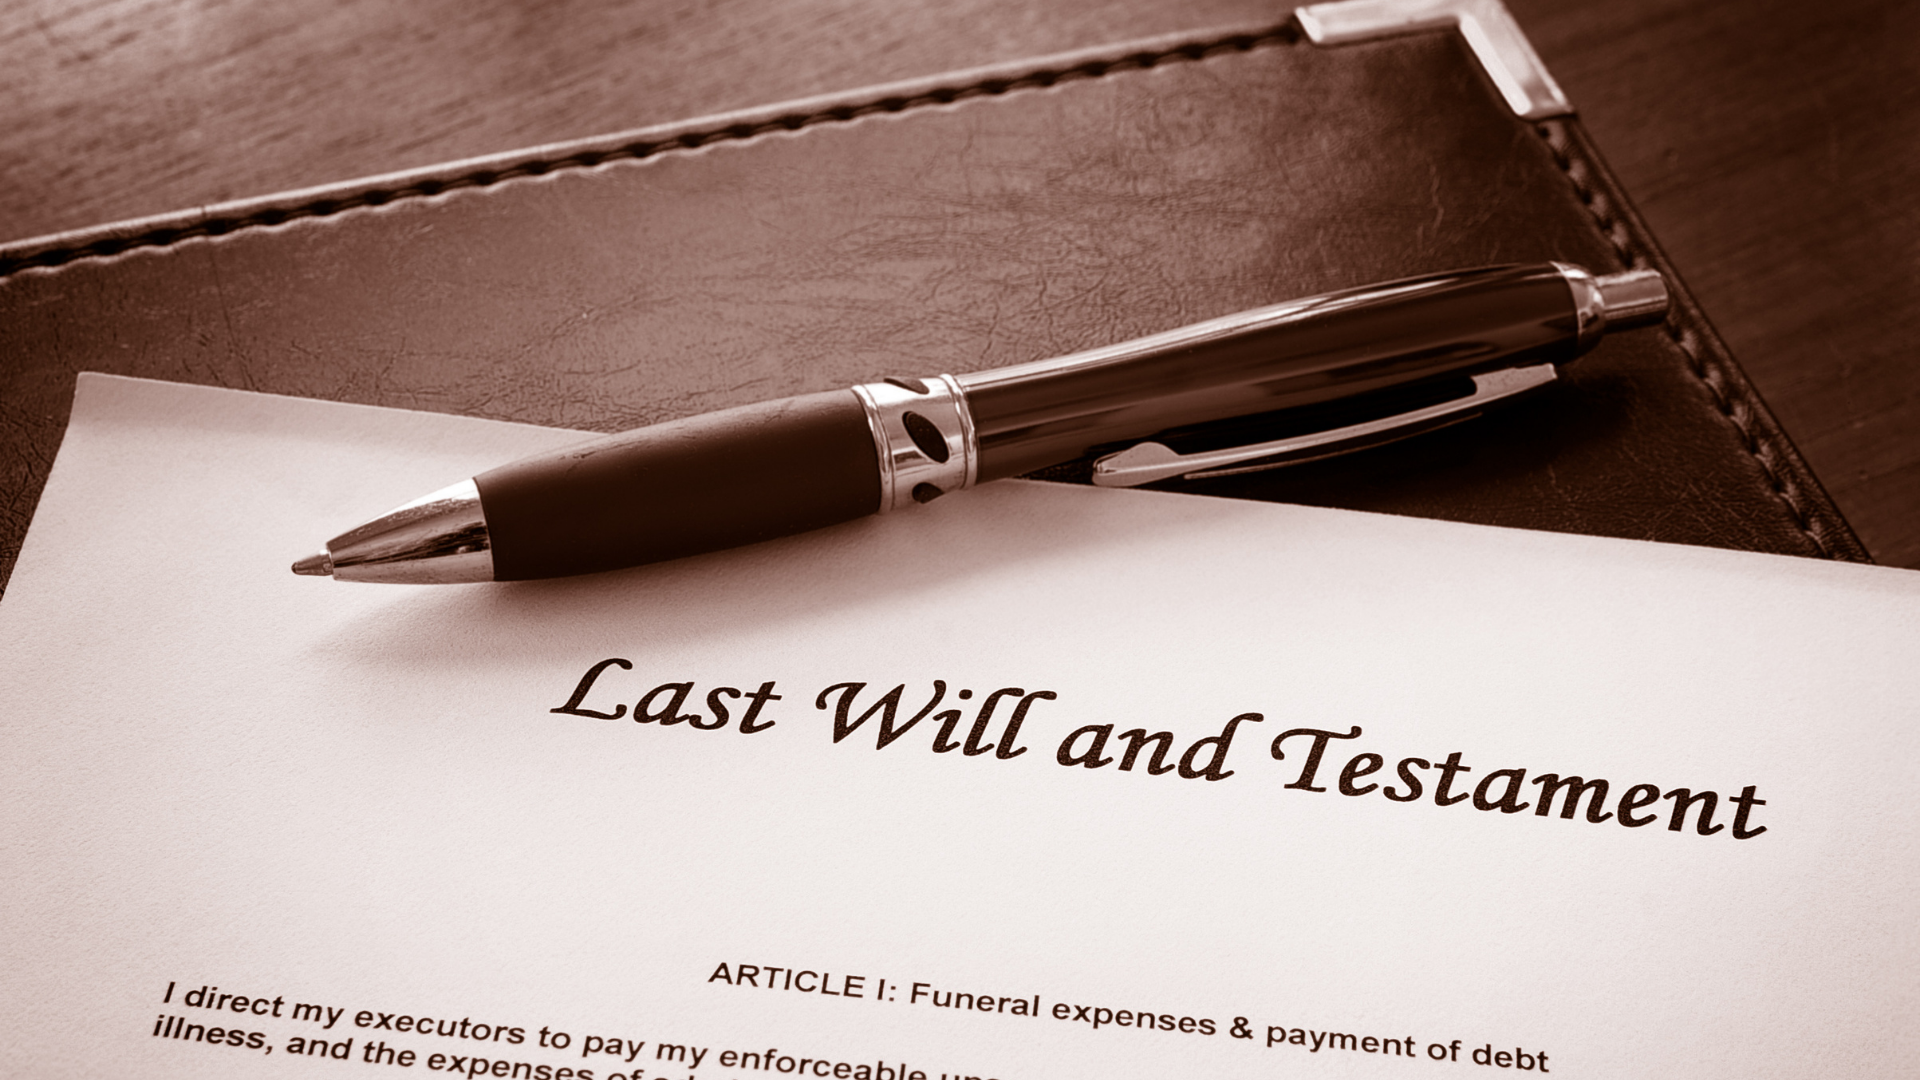 The importance of having a legal will